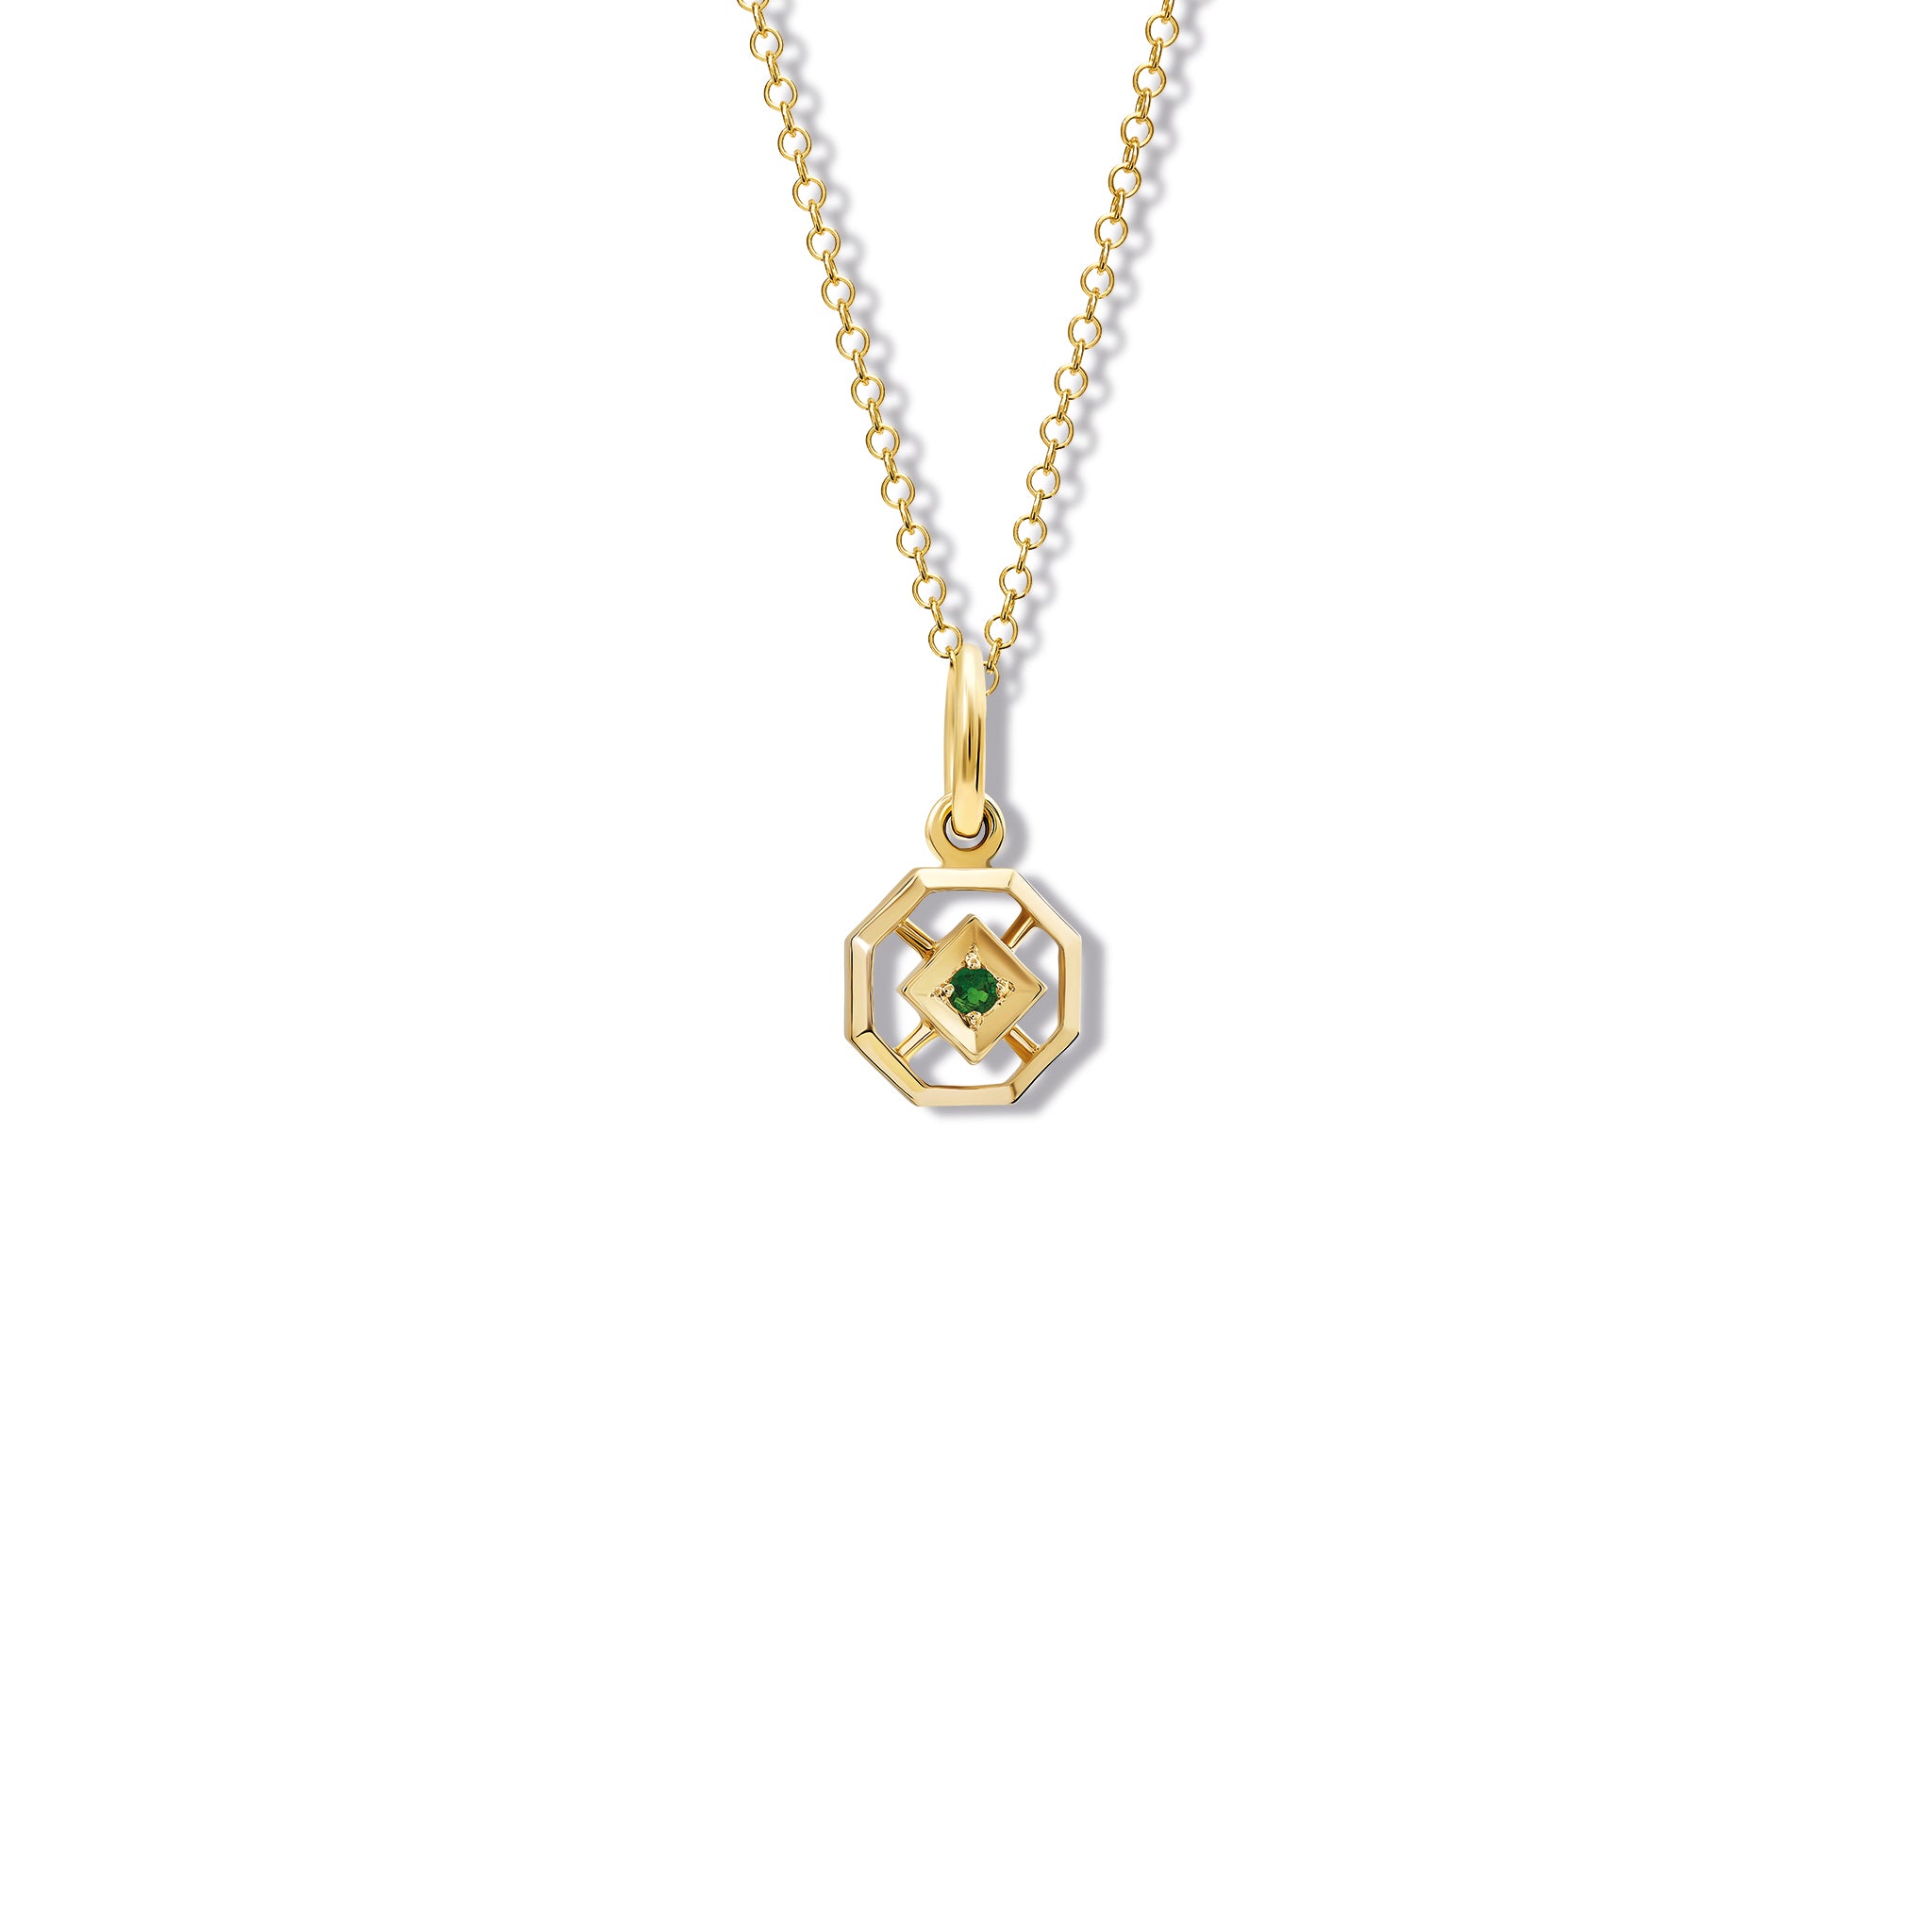 Parquet Small Necklace Pendant Yellow Gold - Emerald